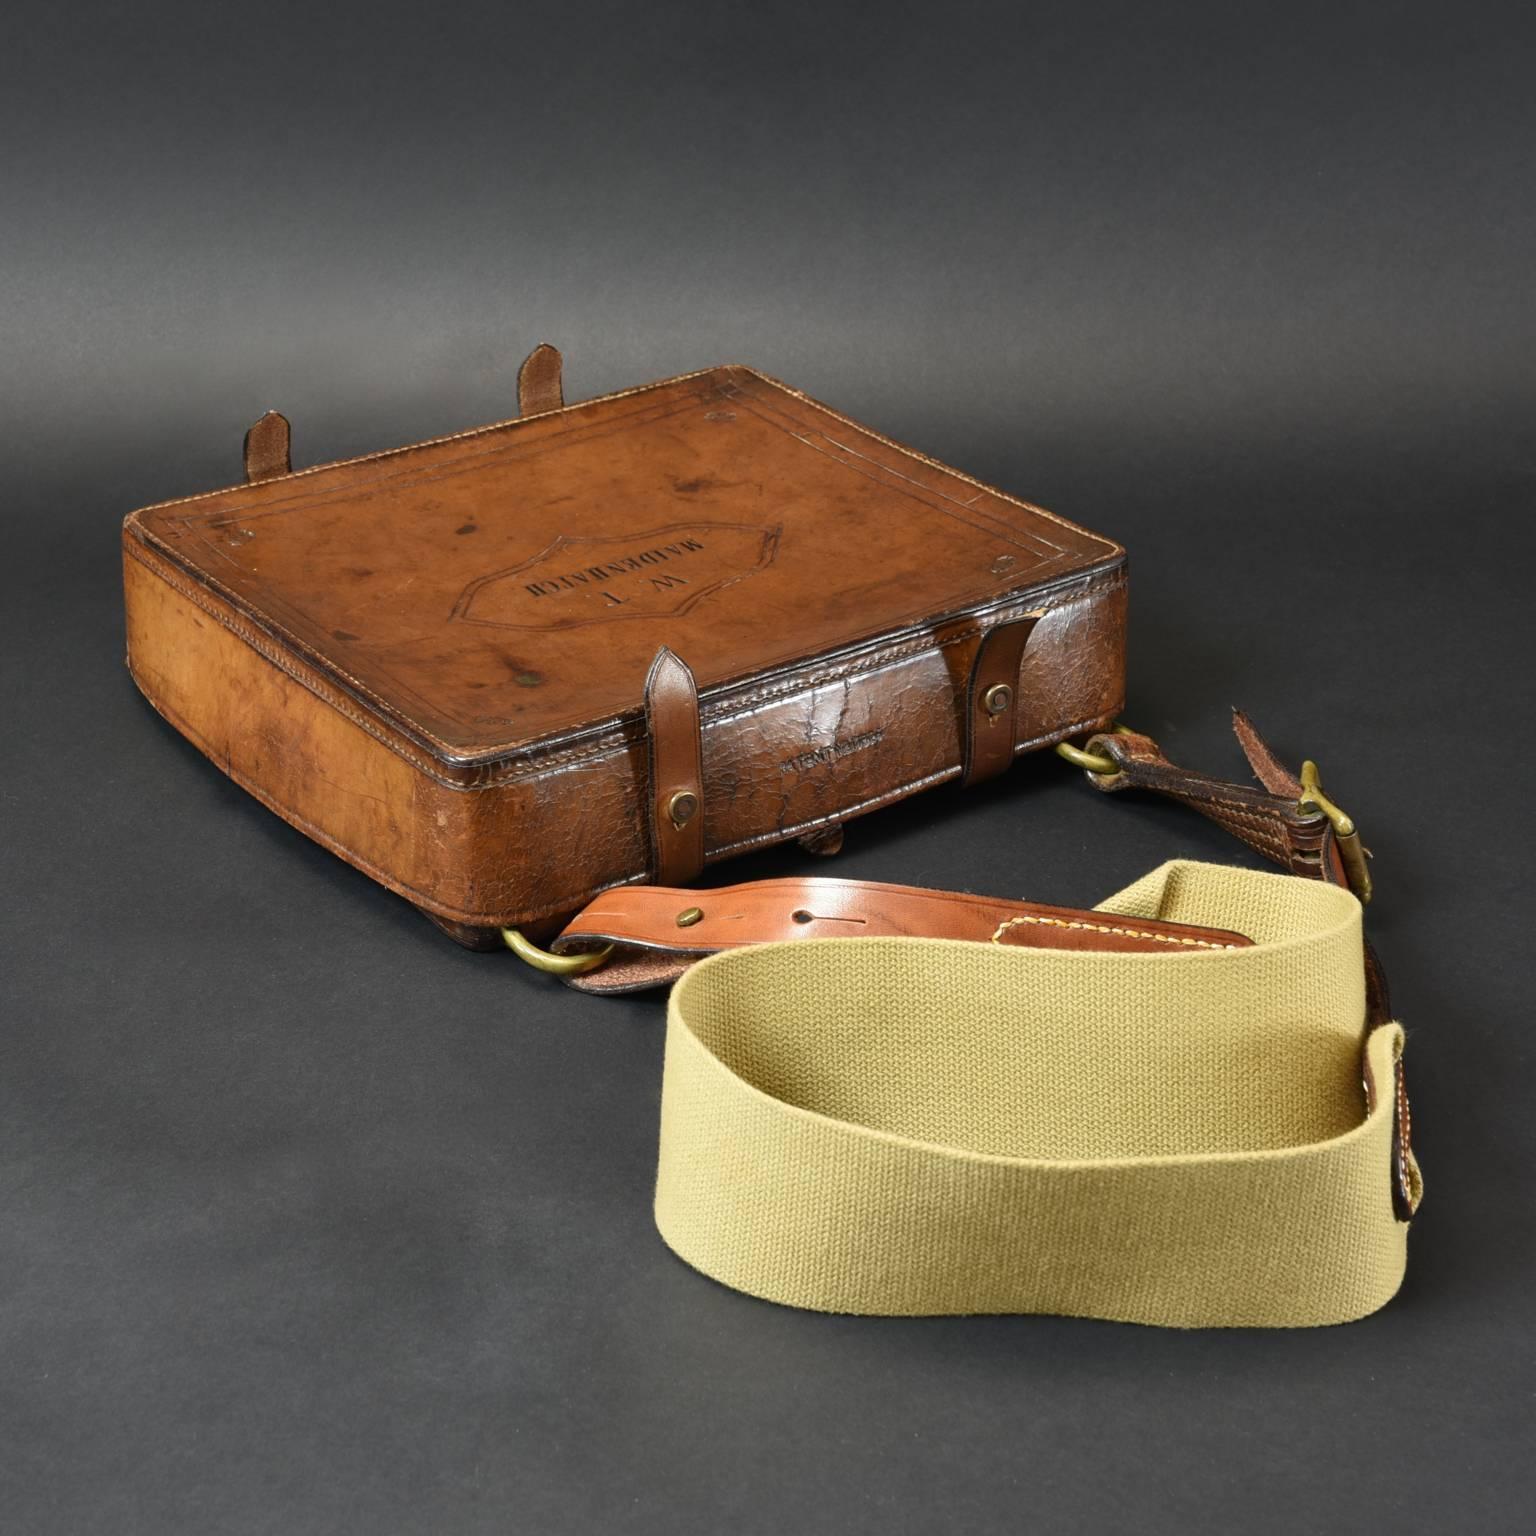 The 'Gannochy' takes its name from the Scottish estate just north west of Montrose, once famed for having one of the finest grouse moors in Scotland.

This device is worn slung over the shoulder so it rests comfortably on the hip. The drop-down lid